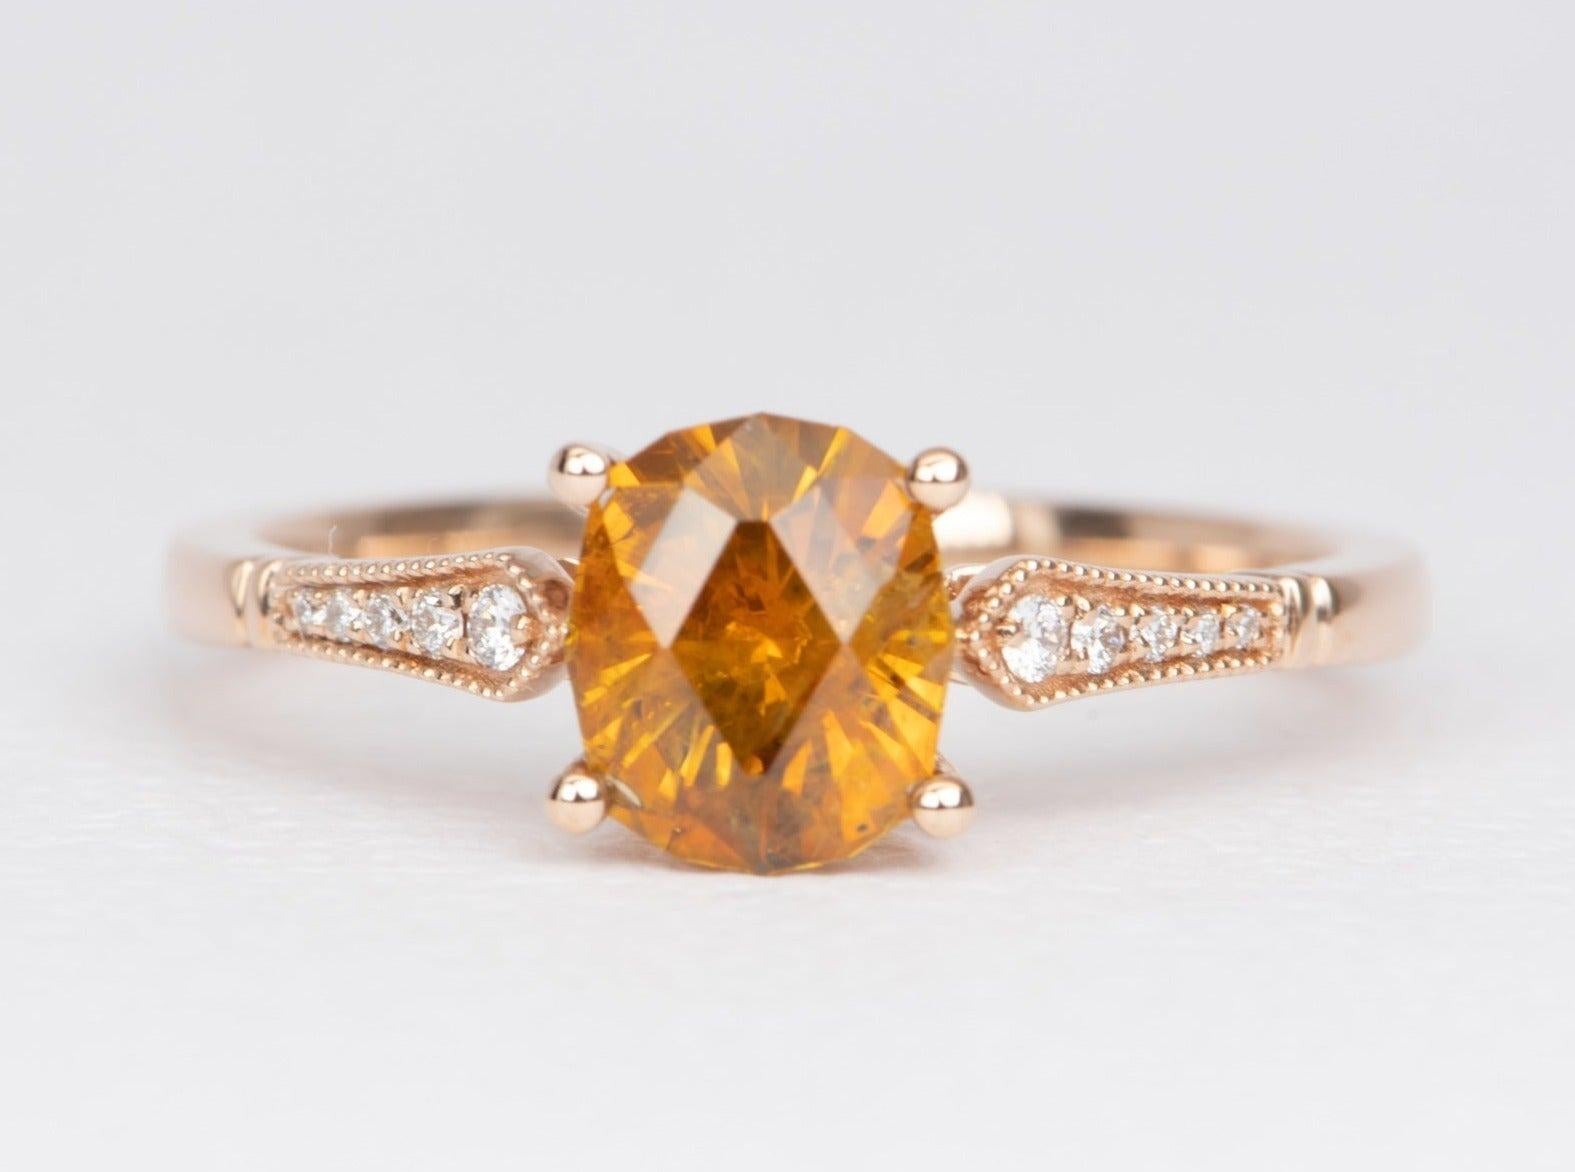 ♥ Solid 14k rose gold ring set with a beautiful oval-shaped orange Montana sapphire with diamond band
♥ Gorgeous orange color!
♥ The item measures 7.2 mm in length, 6.7 mm in width, and stands 5.6 mm from the finger

♥ US Size 7 (Free resizing up or